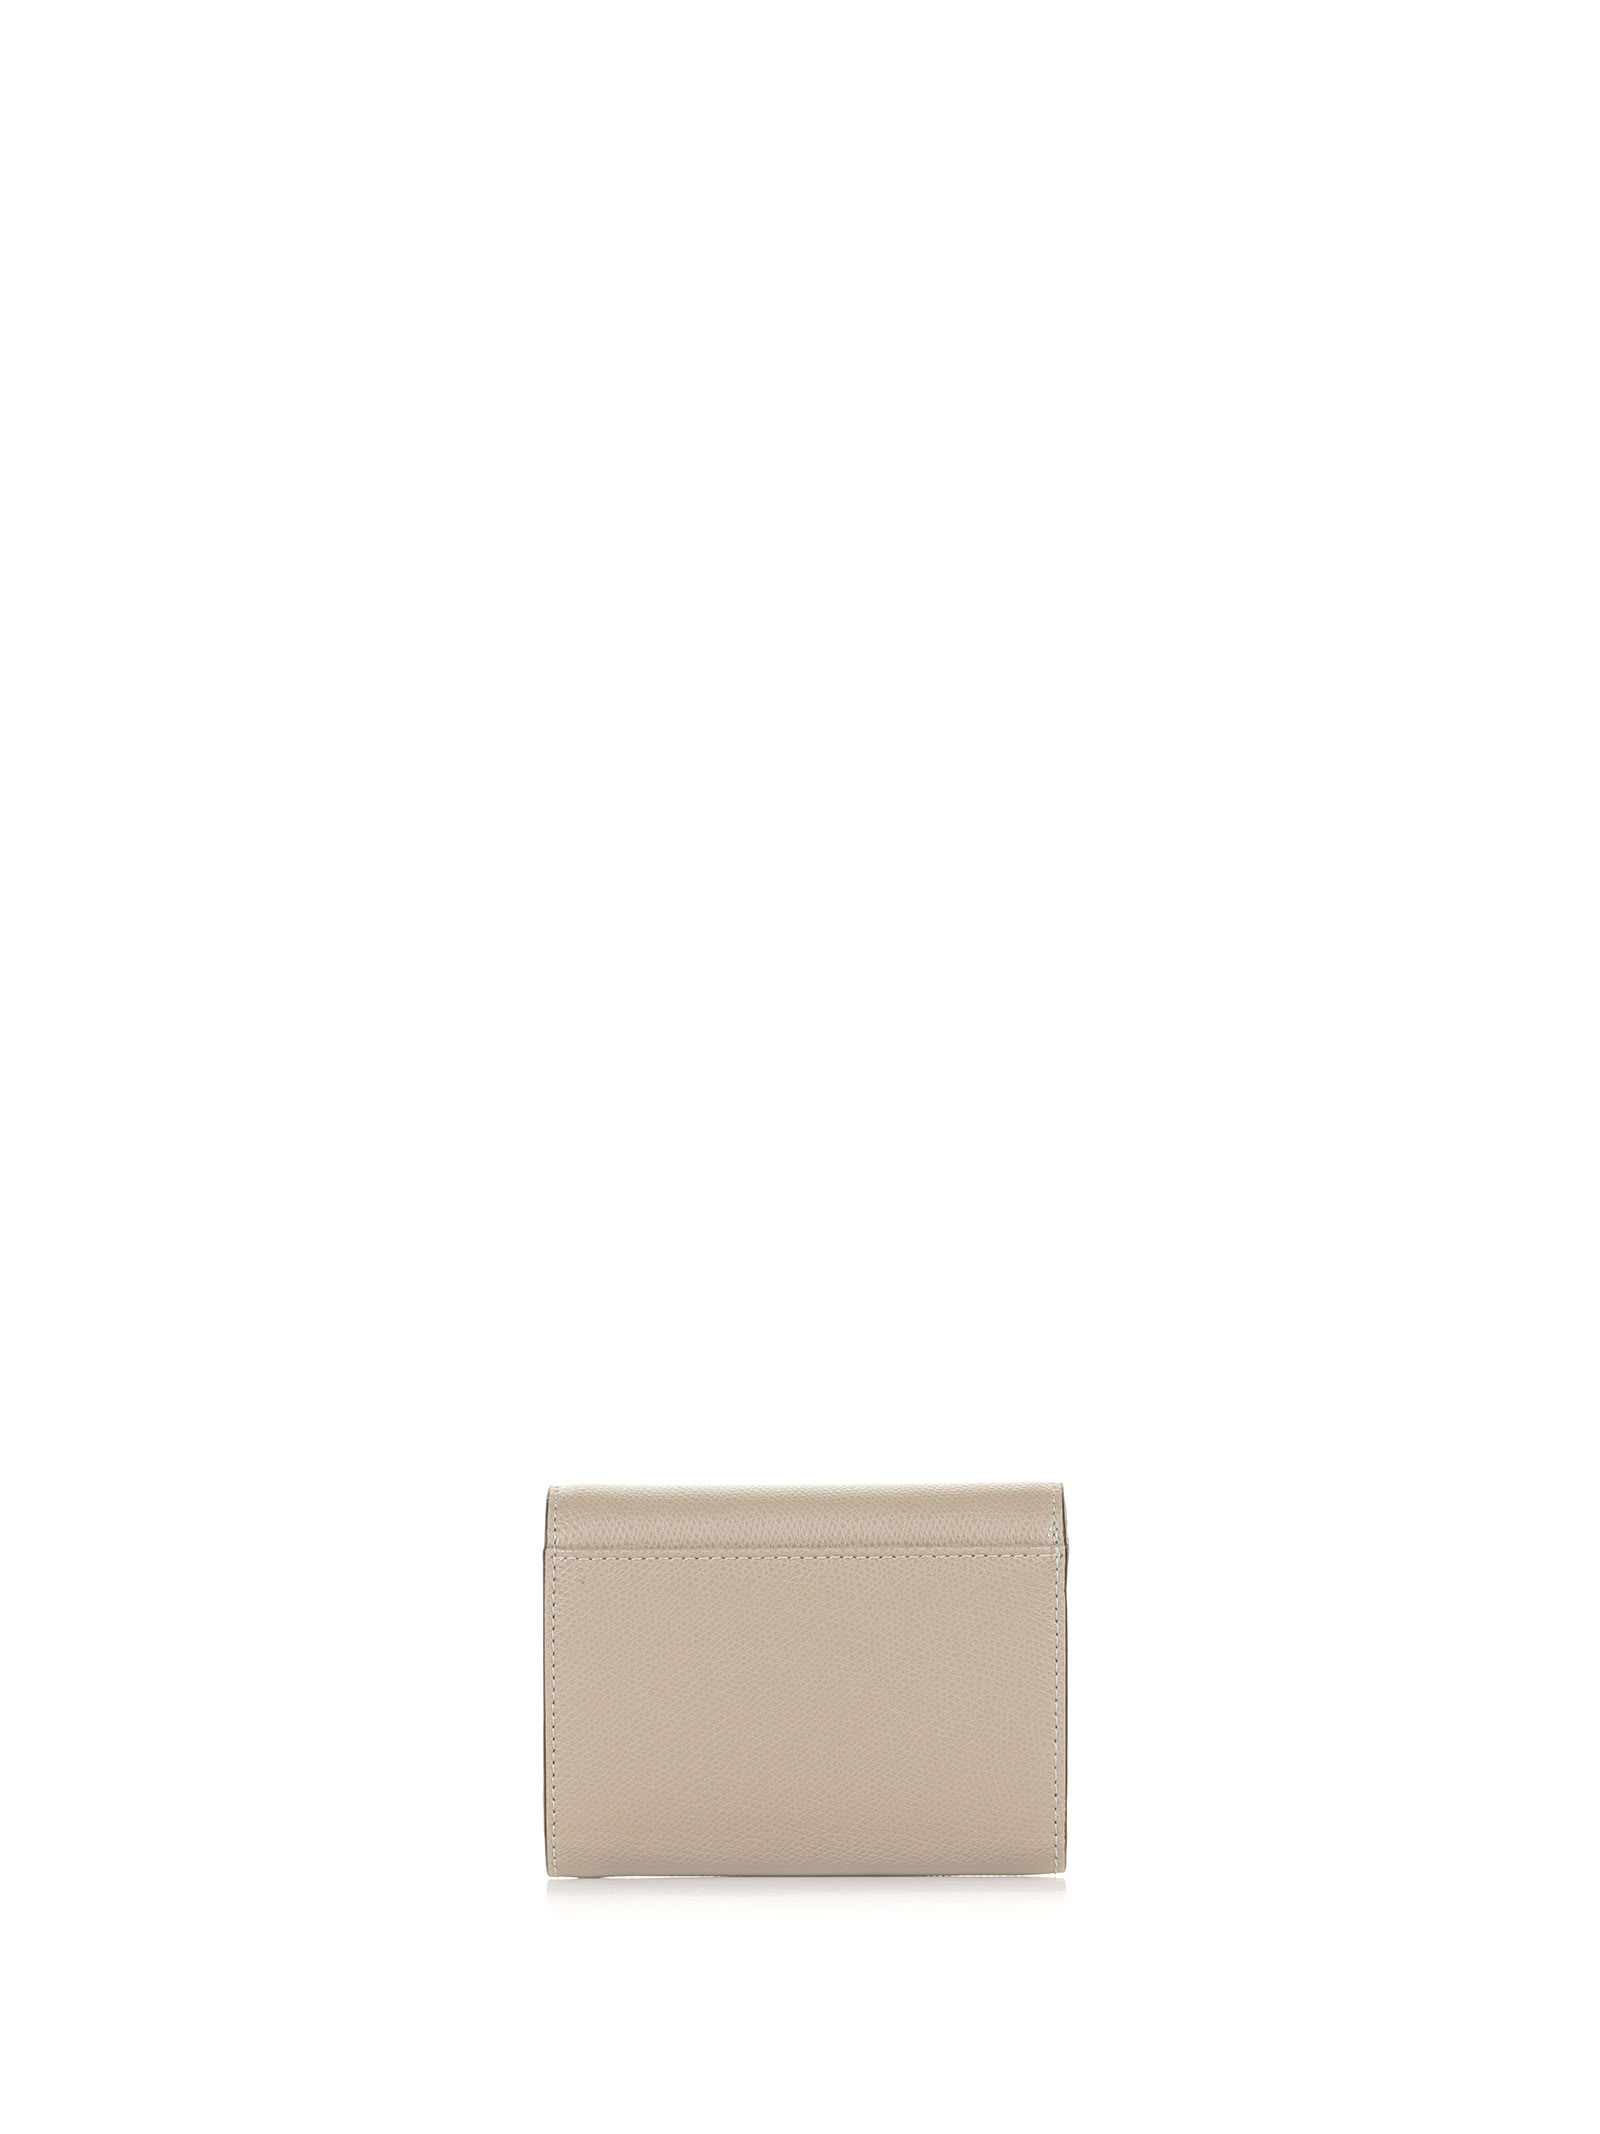 Furla Camelia Compact Wallet With Flap In Marmo | ModeSens